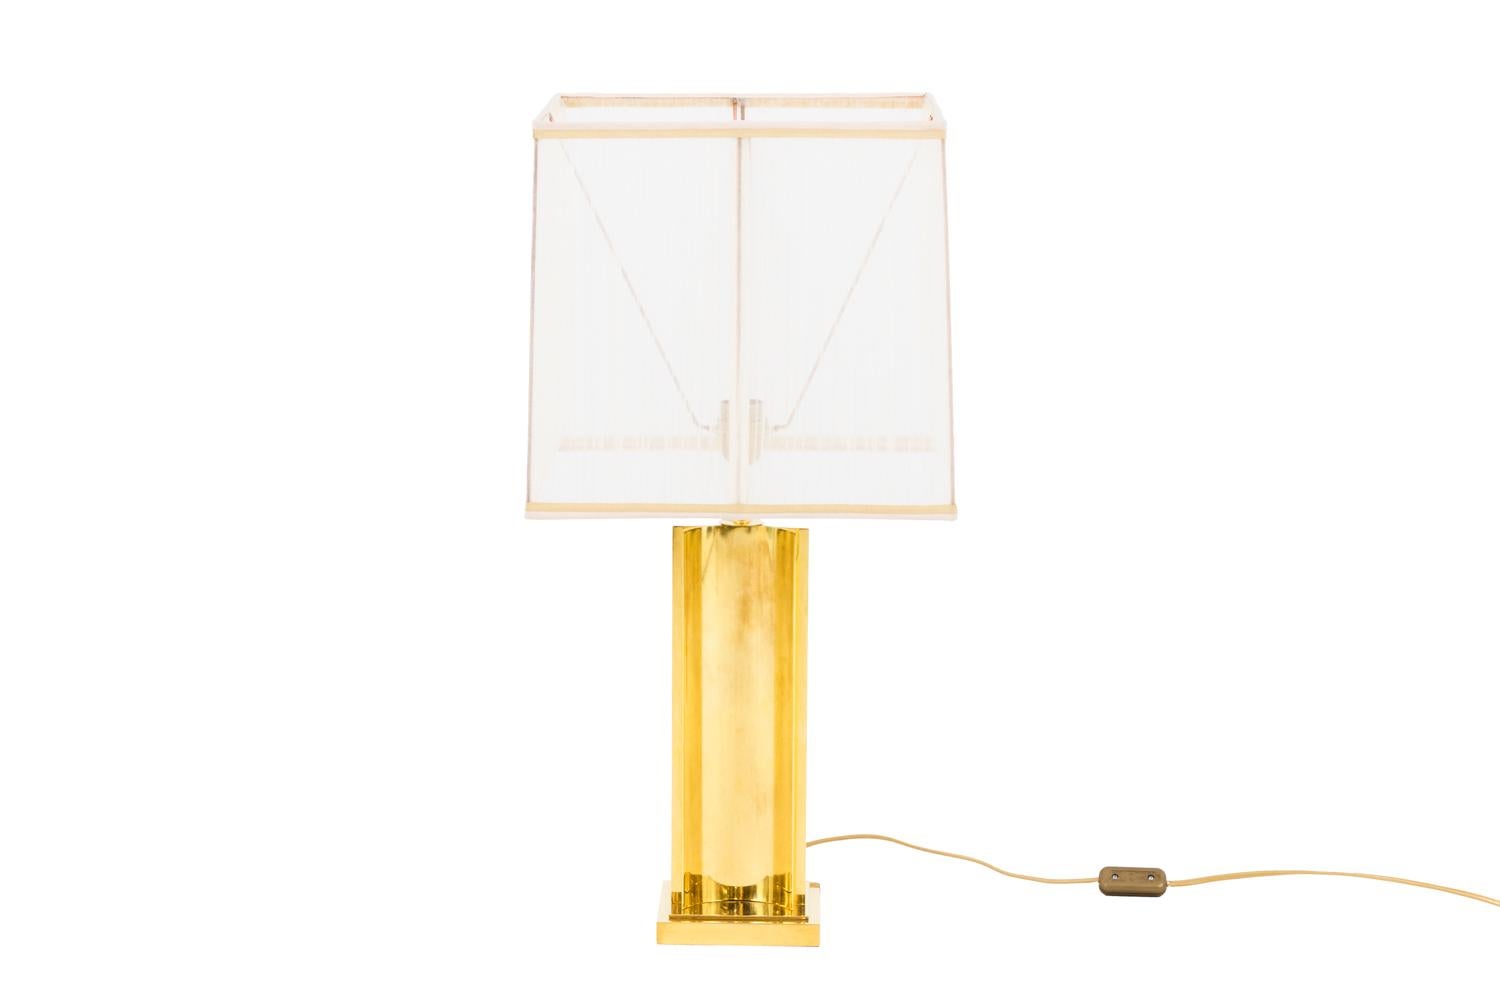 Gilt brass lamp with a shaft in three half-tubes shape backed around a central round stick.
Molded square shape base.

Square lampshade in white organza.

Work realized in the 1970s.

New and functional electrical system.

! The price doesn’t